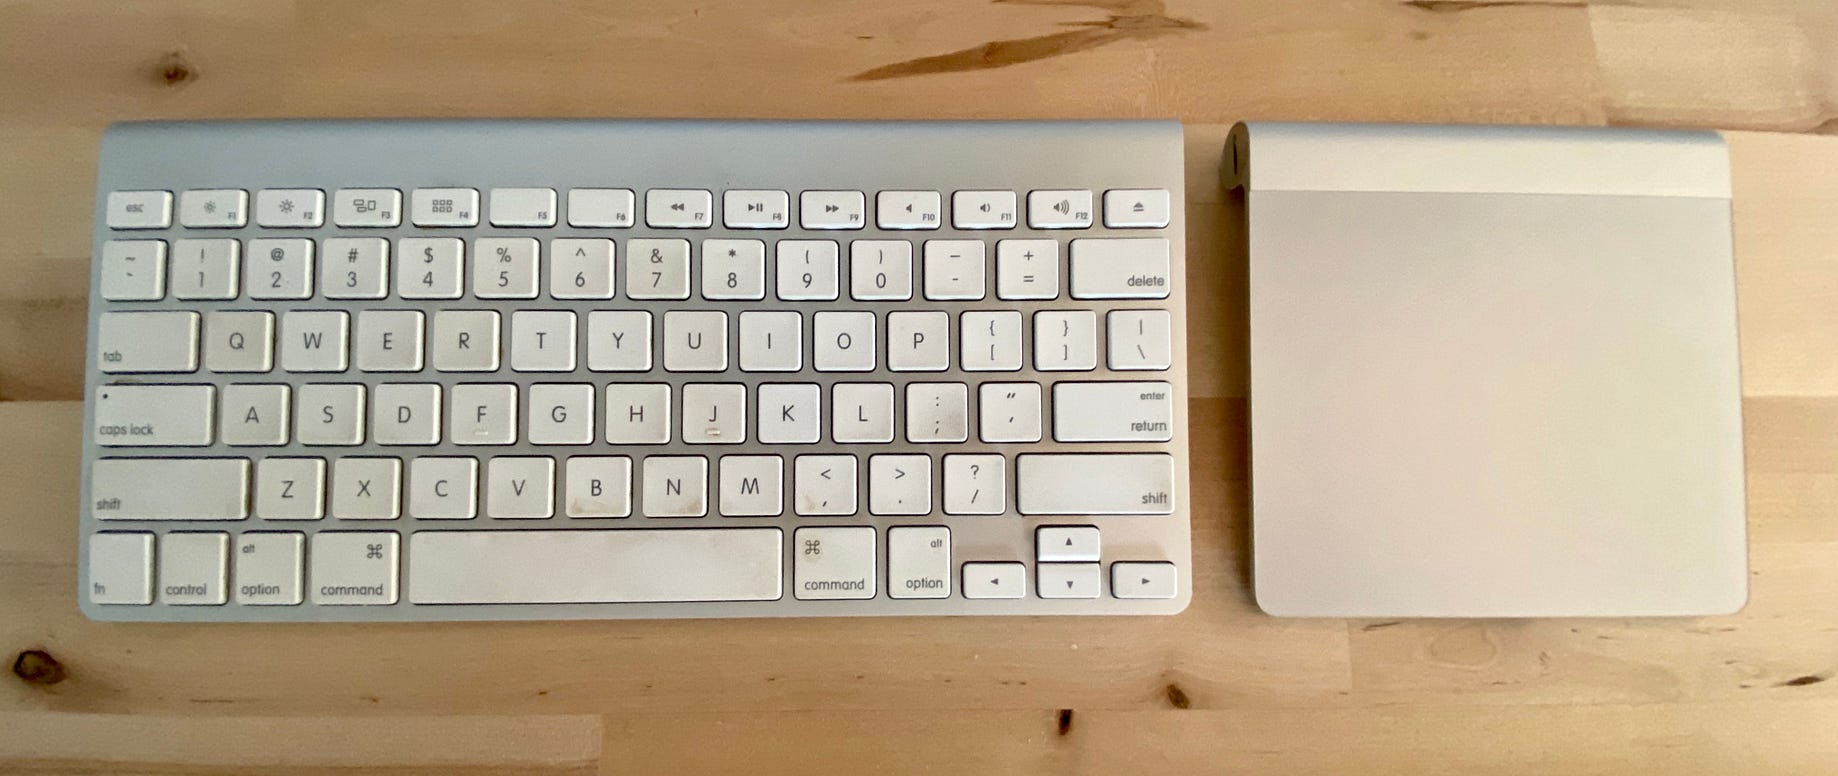 Apple wireless keyboard and mouse/trackpad problems  by Emre